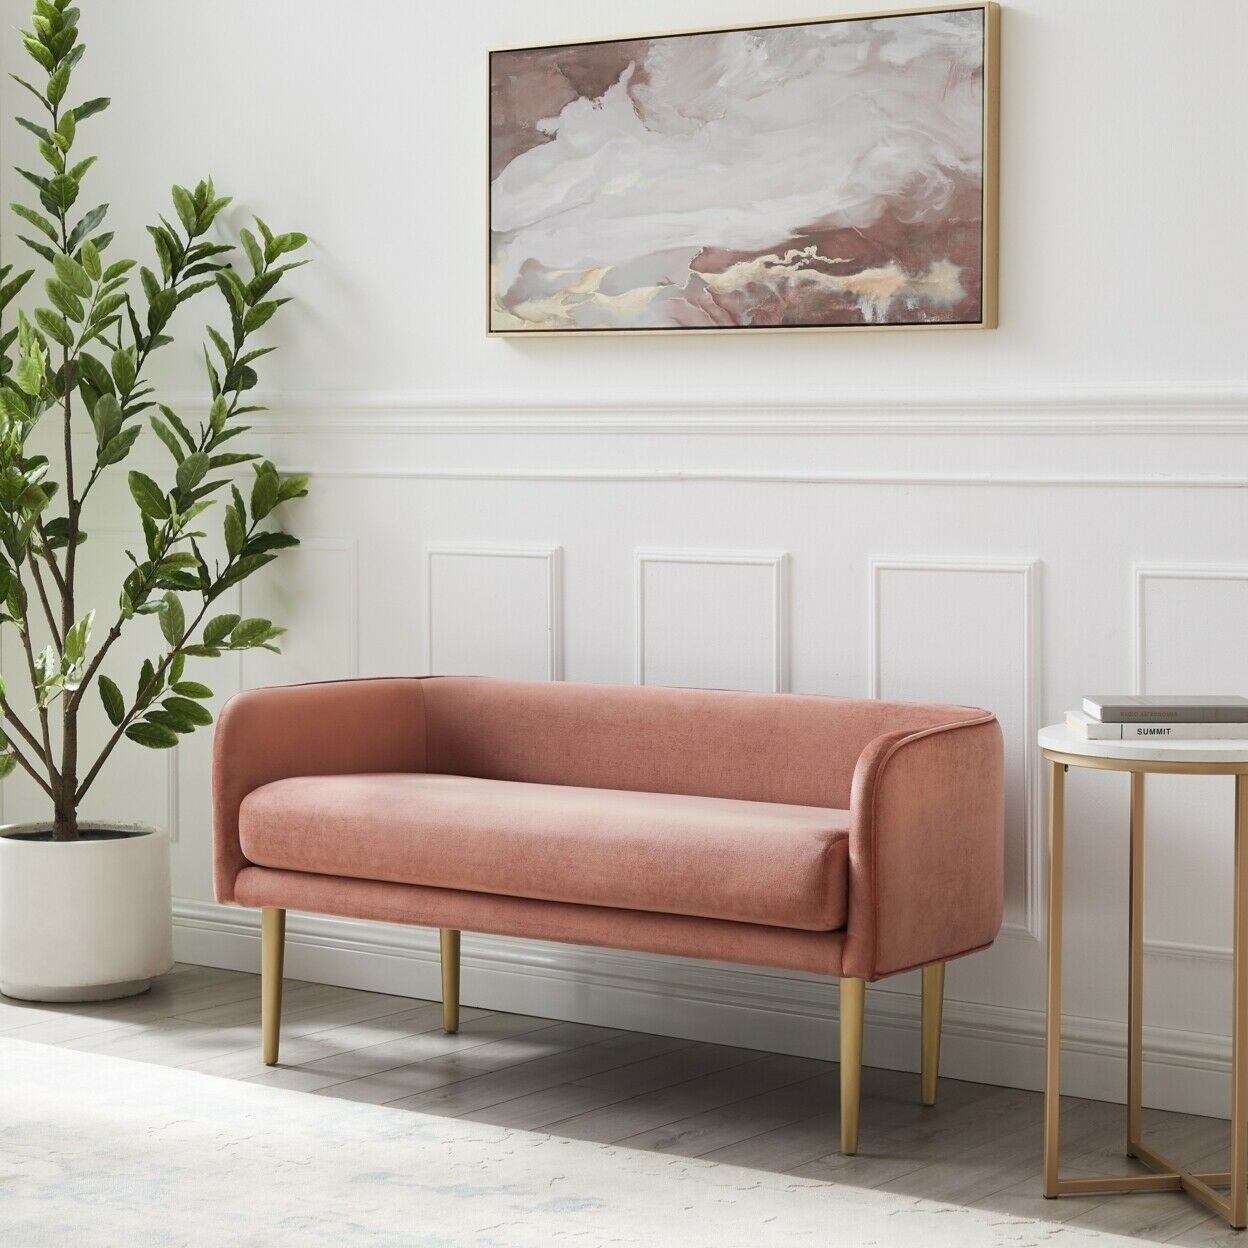 a salmon pink rounded bench with gold legs